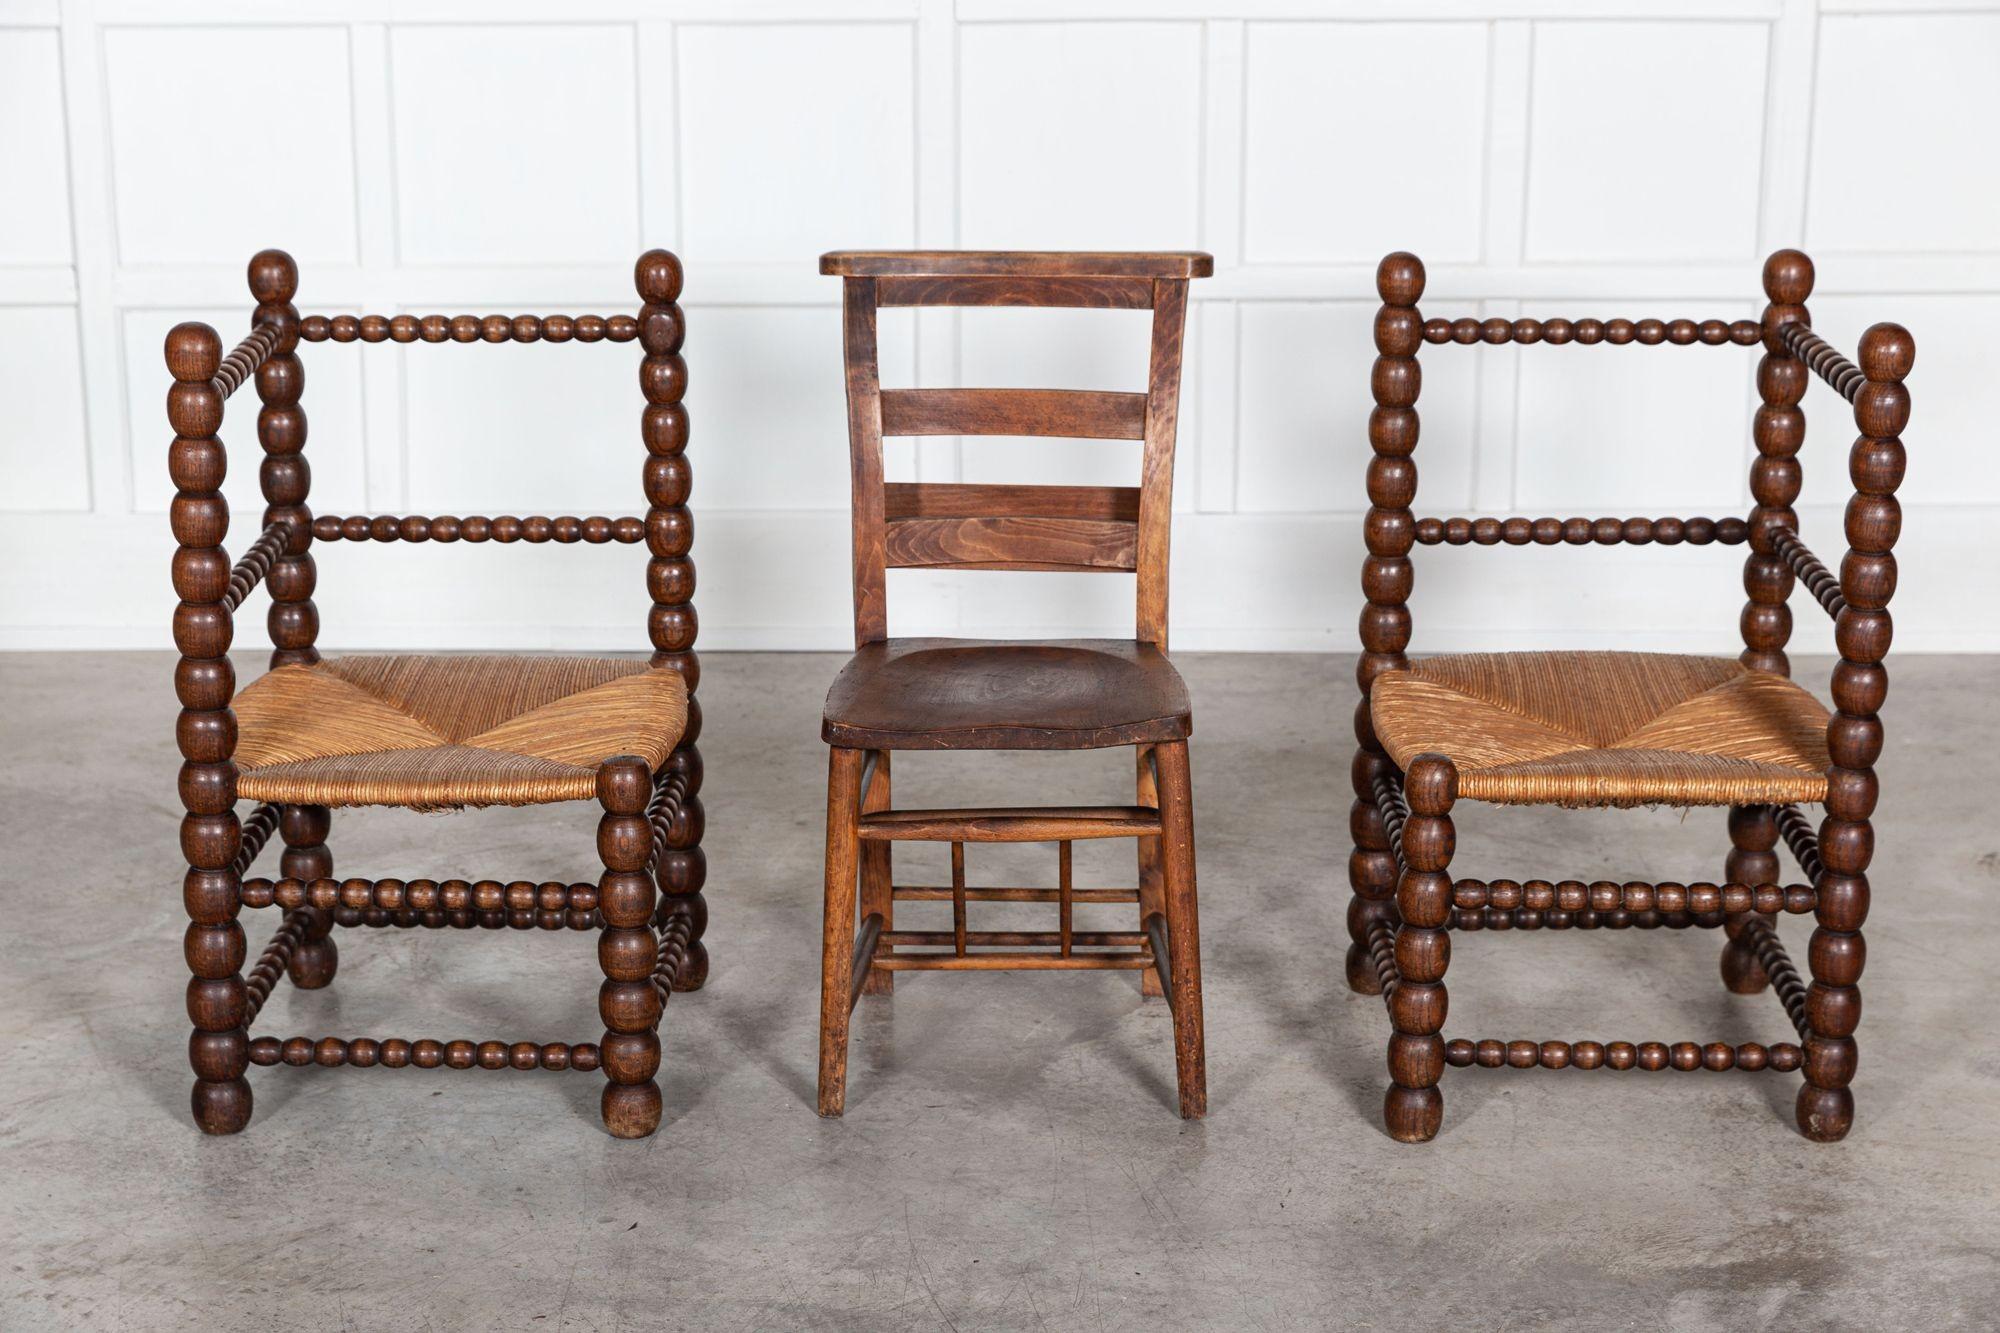 circa 1870
Pair oversized 19th C French oak Bobbin chairs.
Oversized thick bobbin frames with restored rush seats.
Exceptional scale and form.
sku 1321
Measures: W47 x D48 x H84 cm.